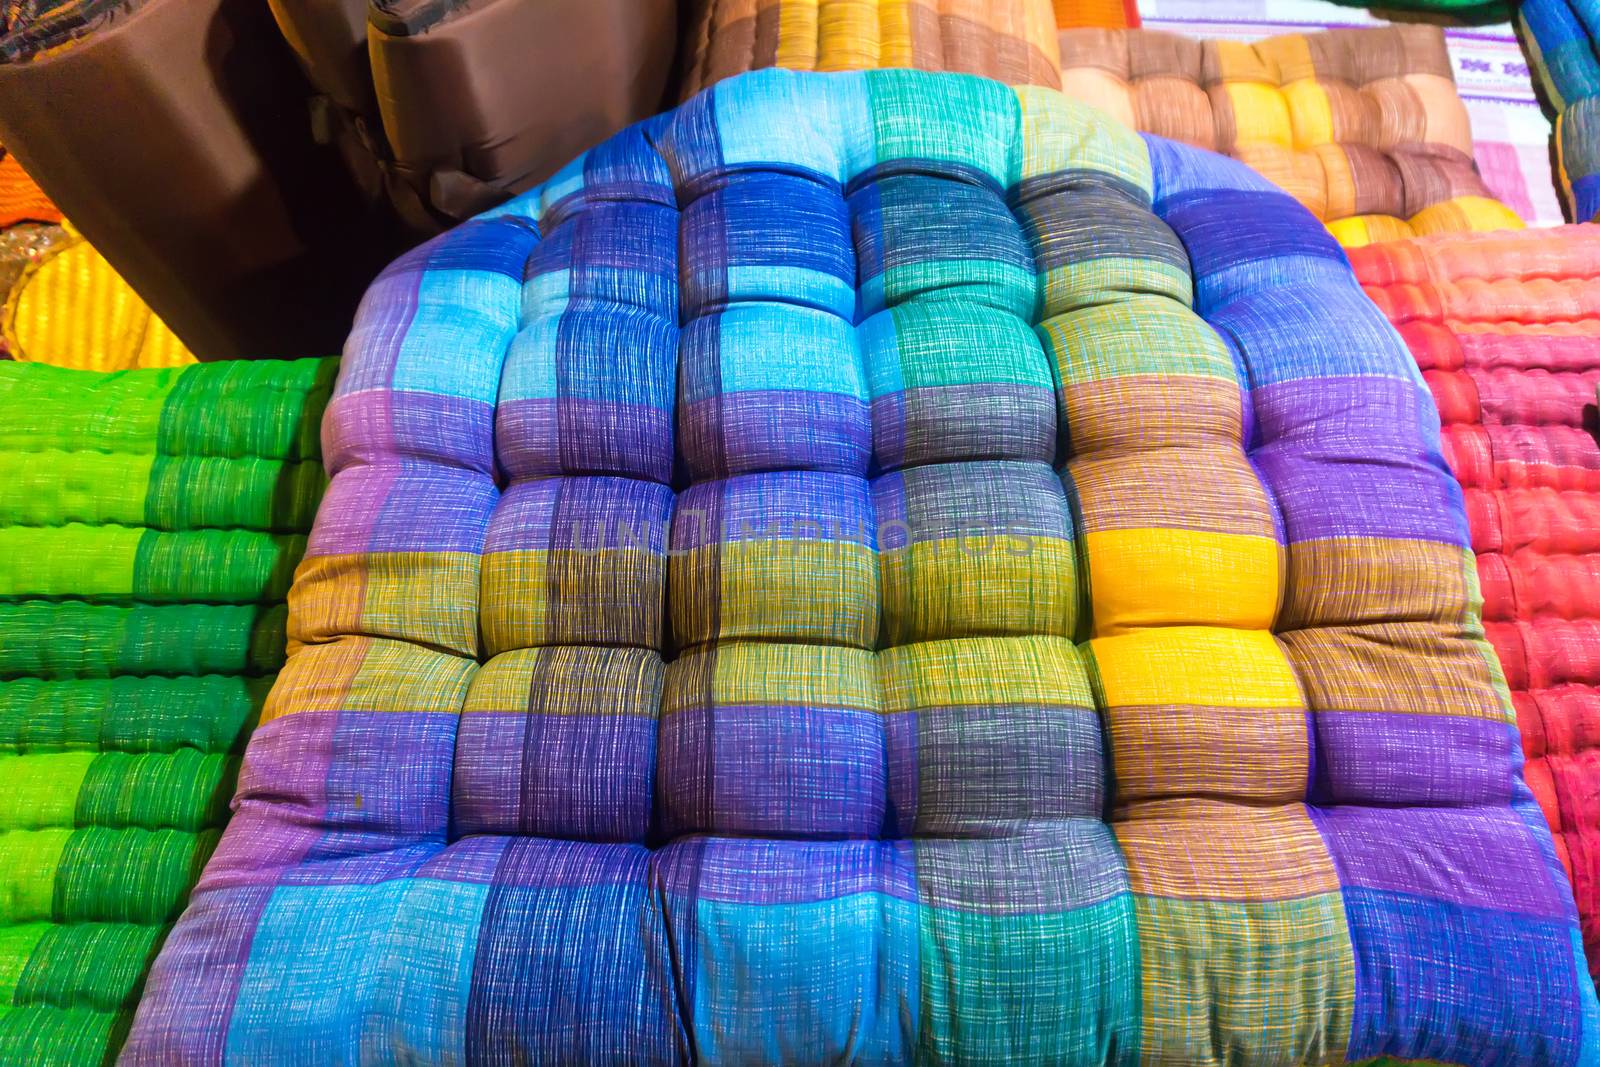 Colorful fabrics sit pillow at street market in thailand by nopparats